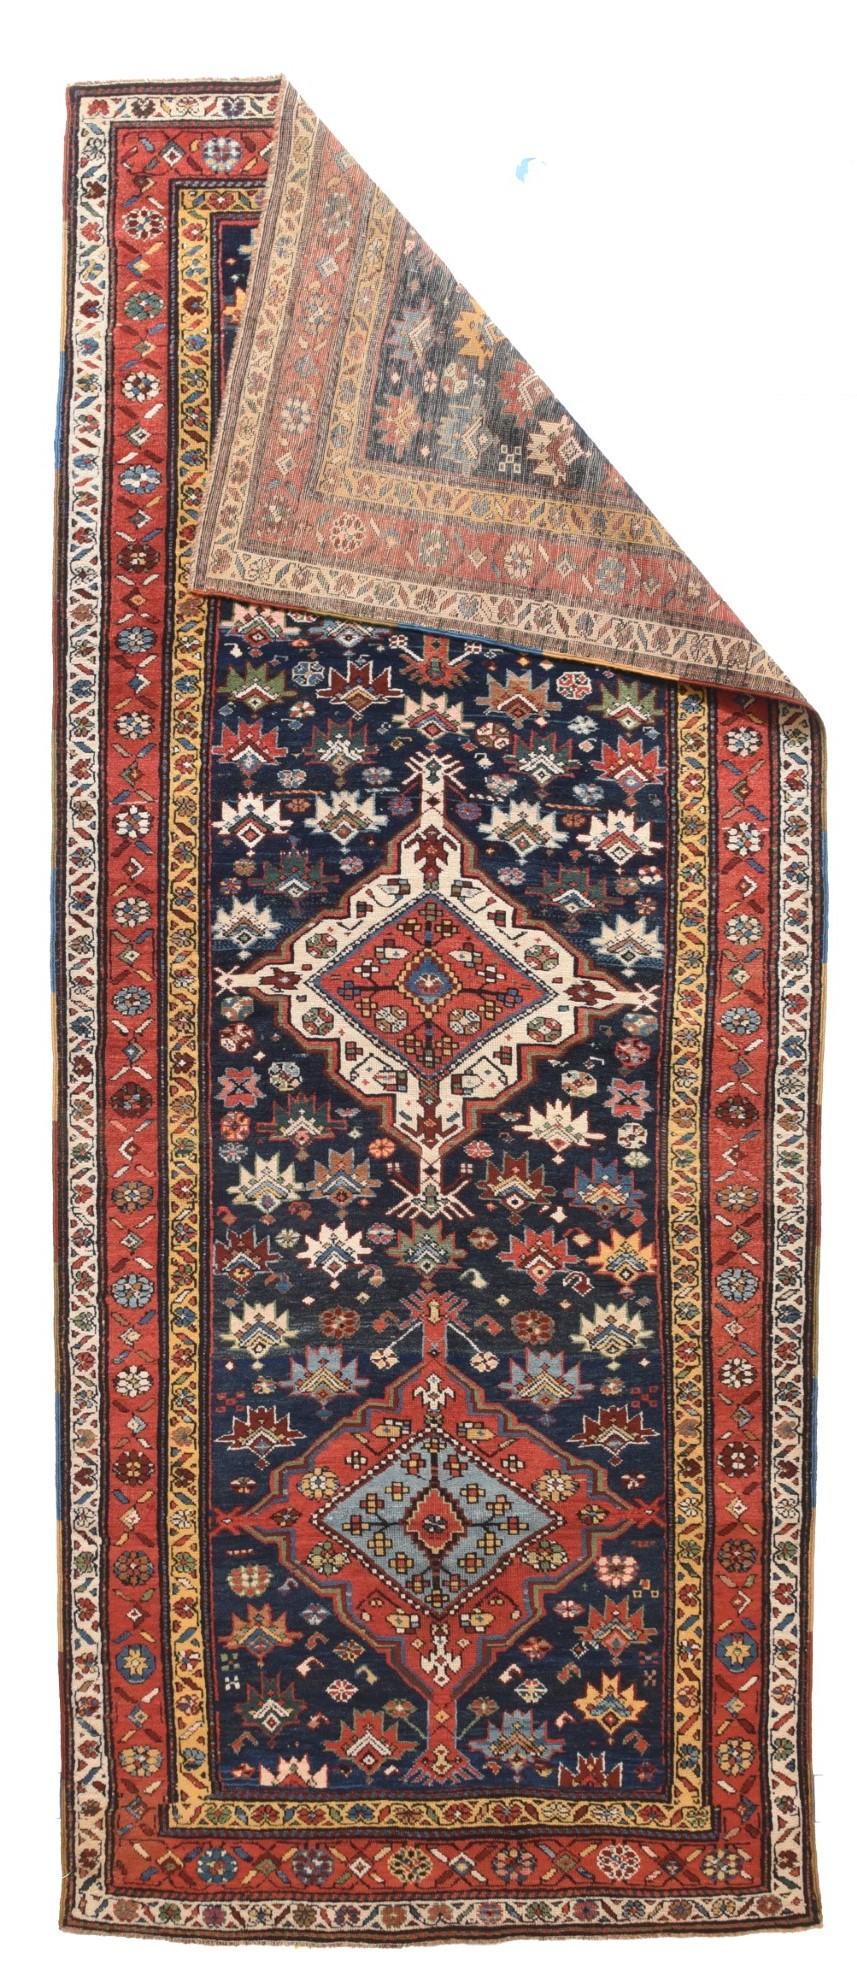 Antique NW Persian Rug 3'9'' x 9'2''. Often Karabagh and Northwest Persian rugs are so close that it is practically impossible to definitively separate them. This wide runner could be either. The dark blue field shows a one-way pattern of sharp